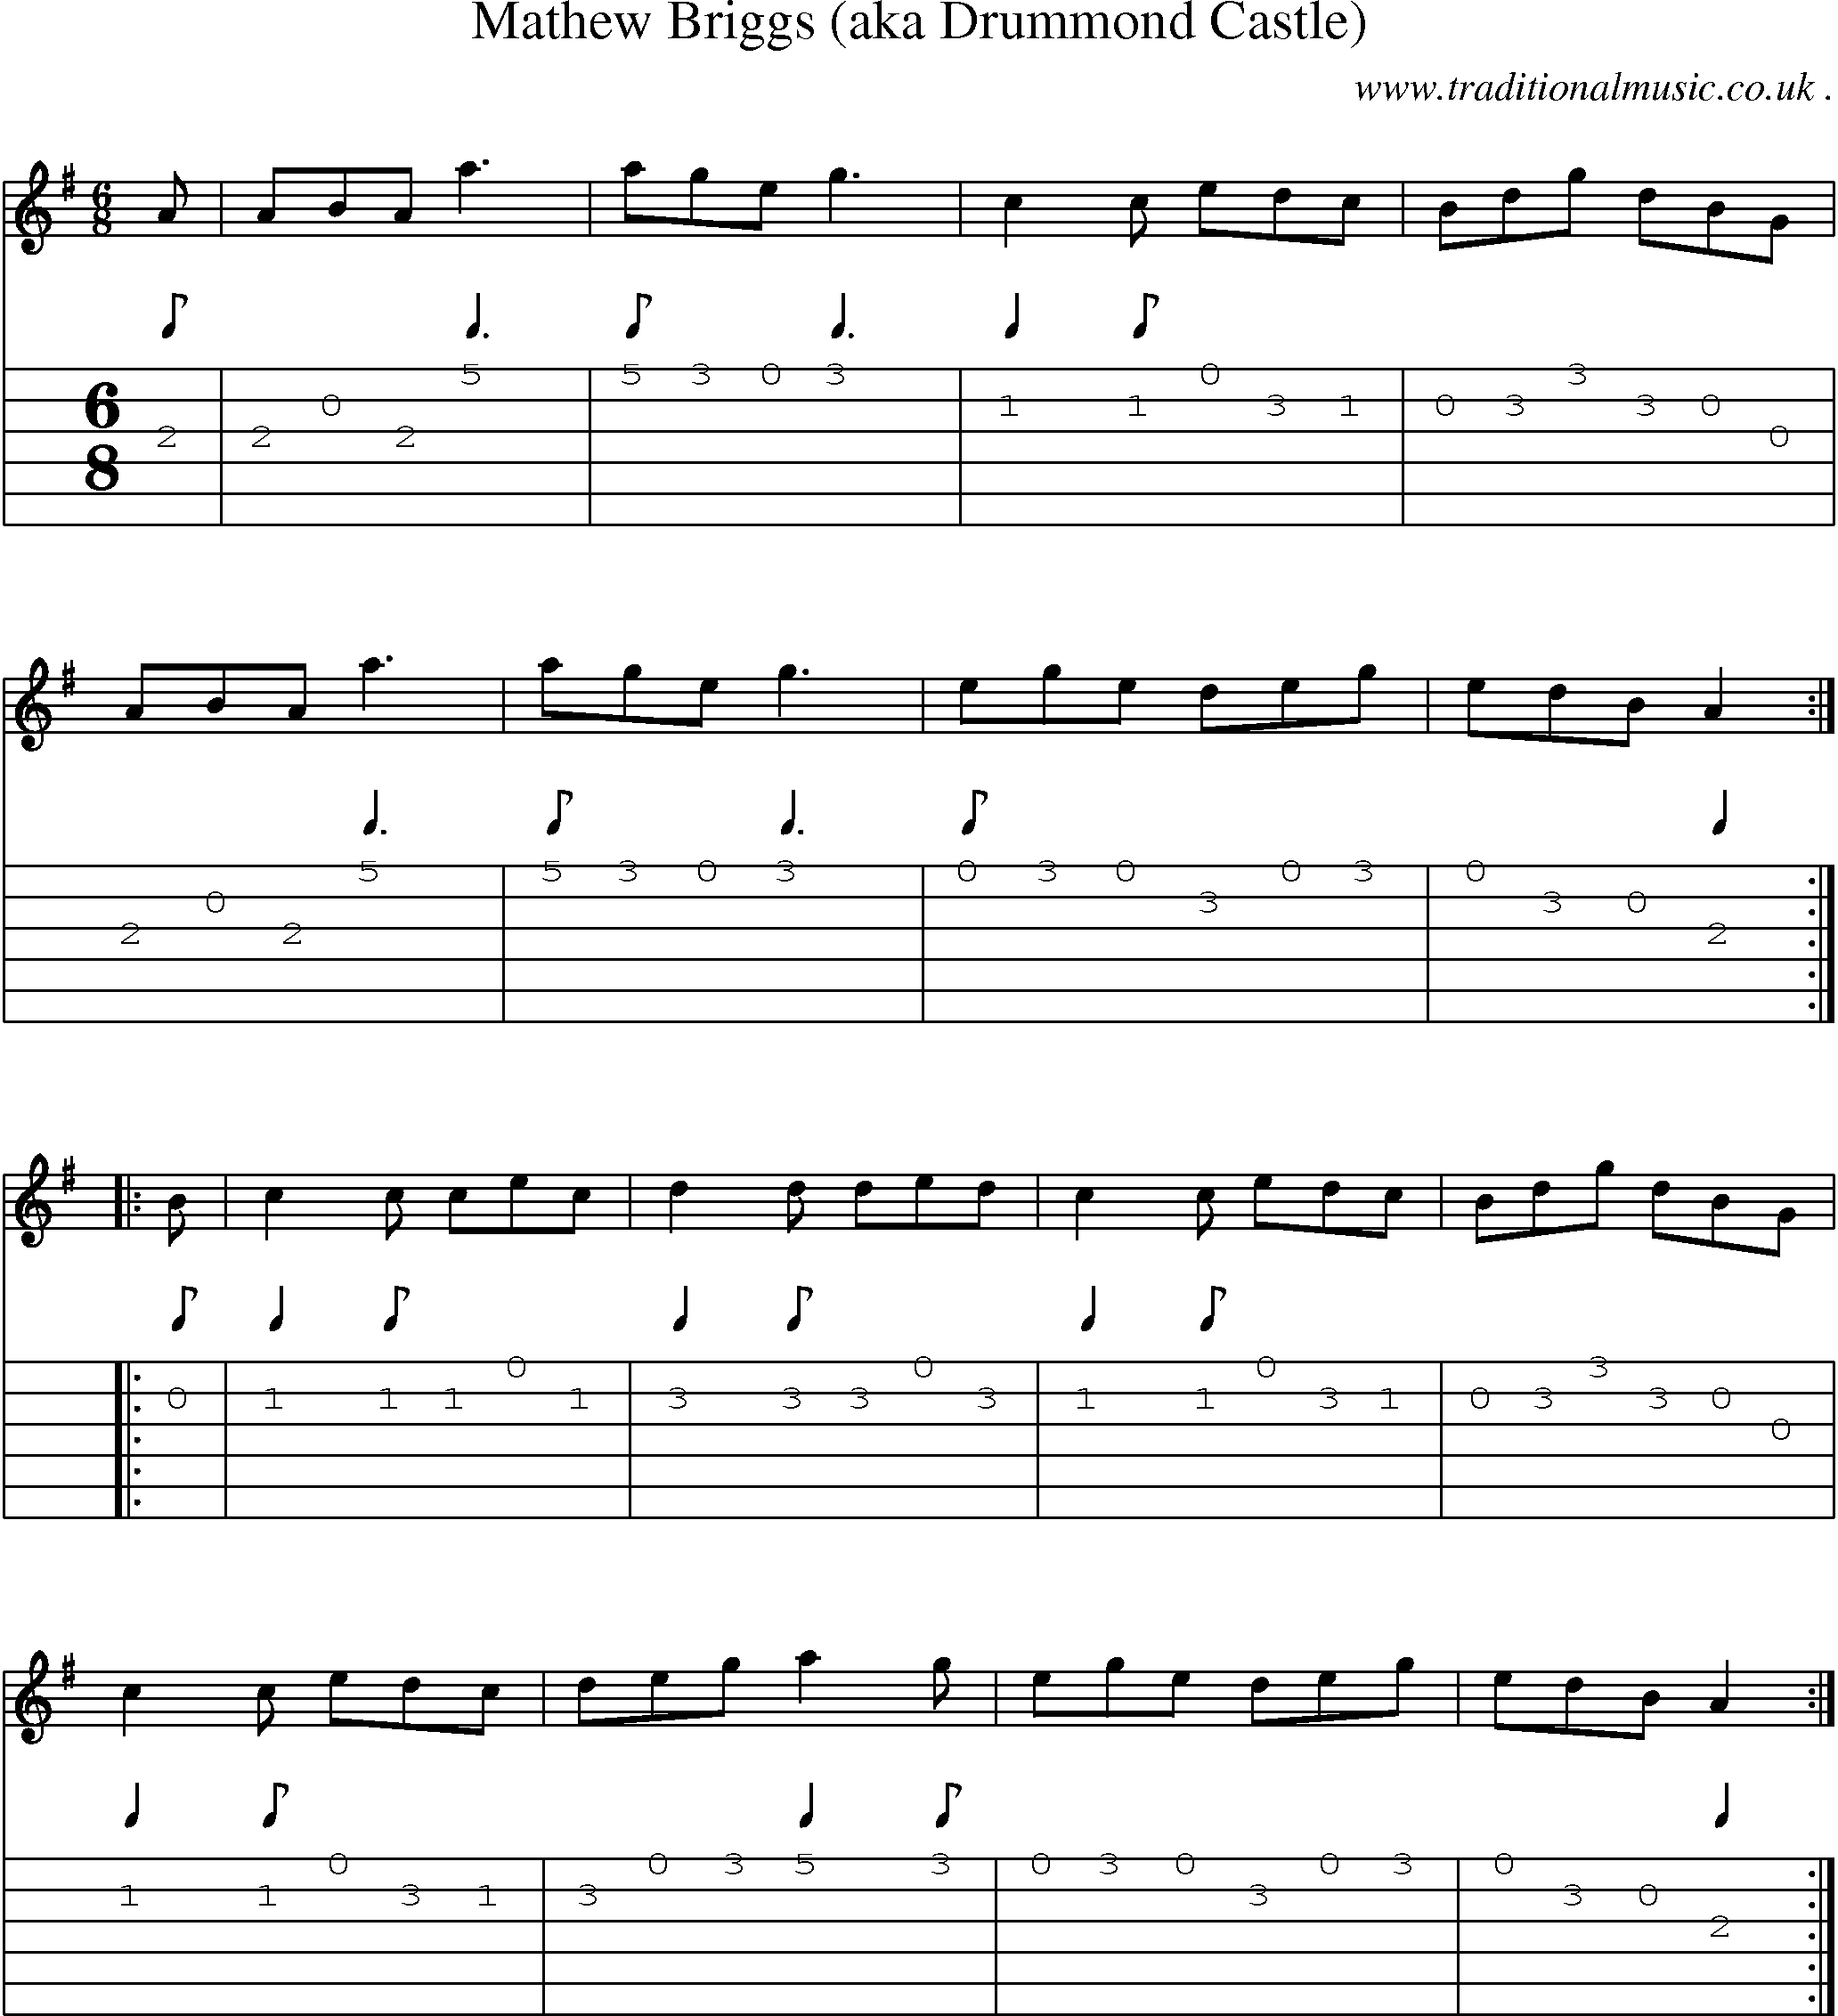 Sheet-Music and Guitar Tabs for Mathew Briggs (aka Drummond Castle)